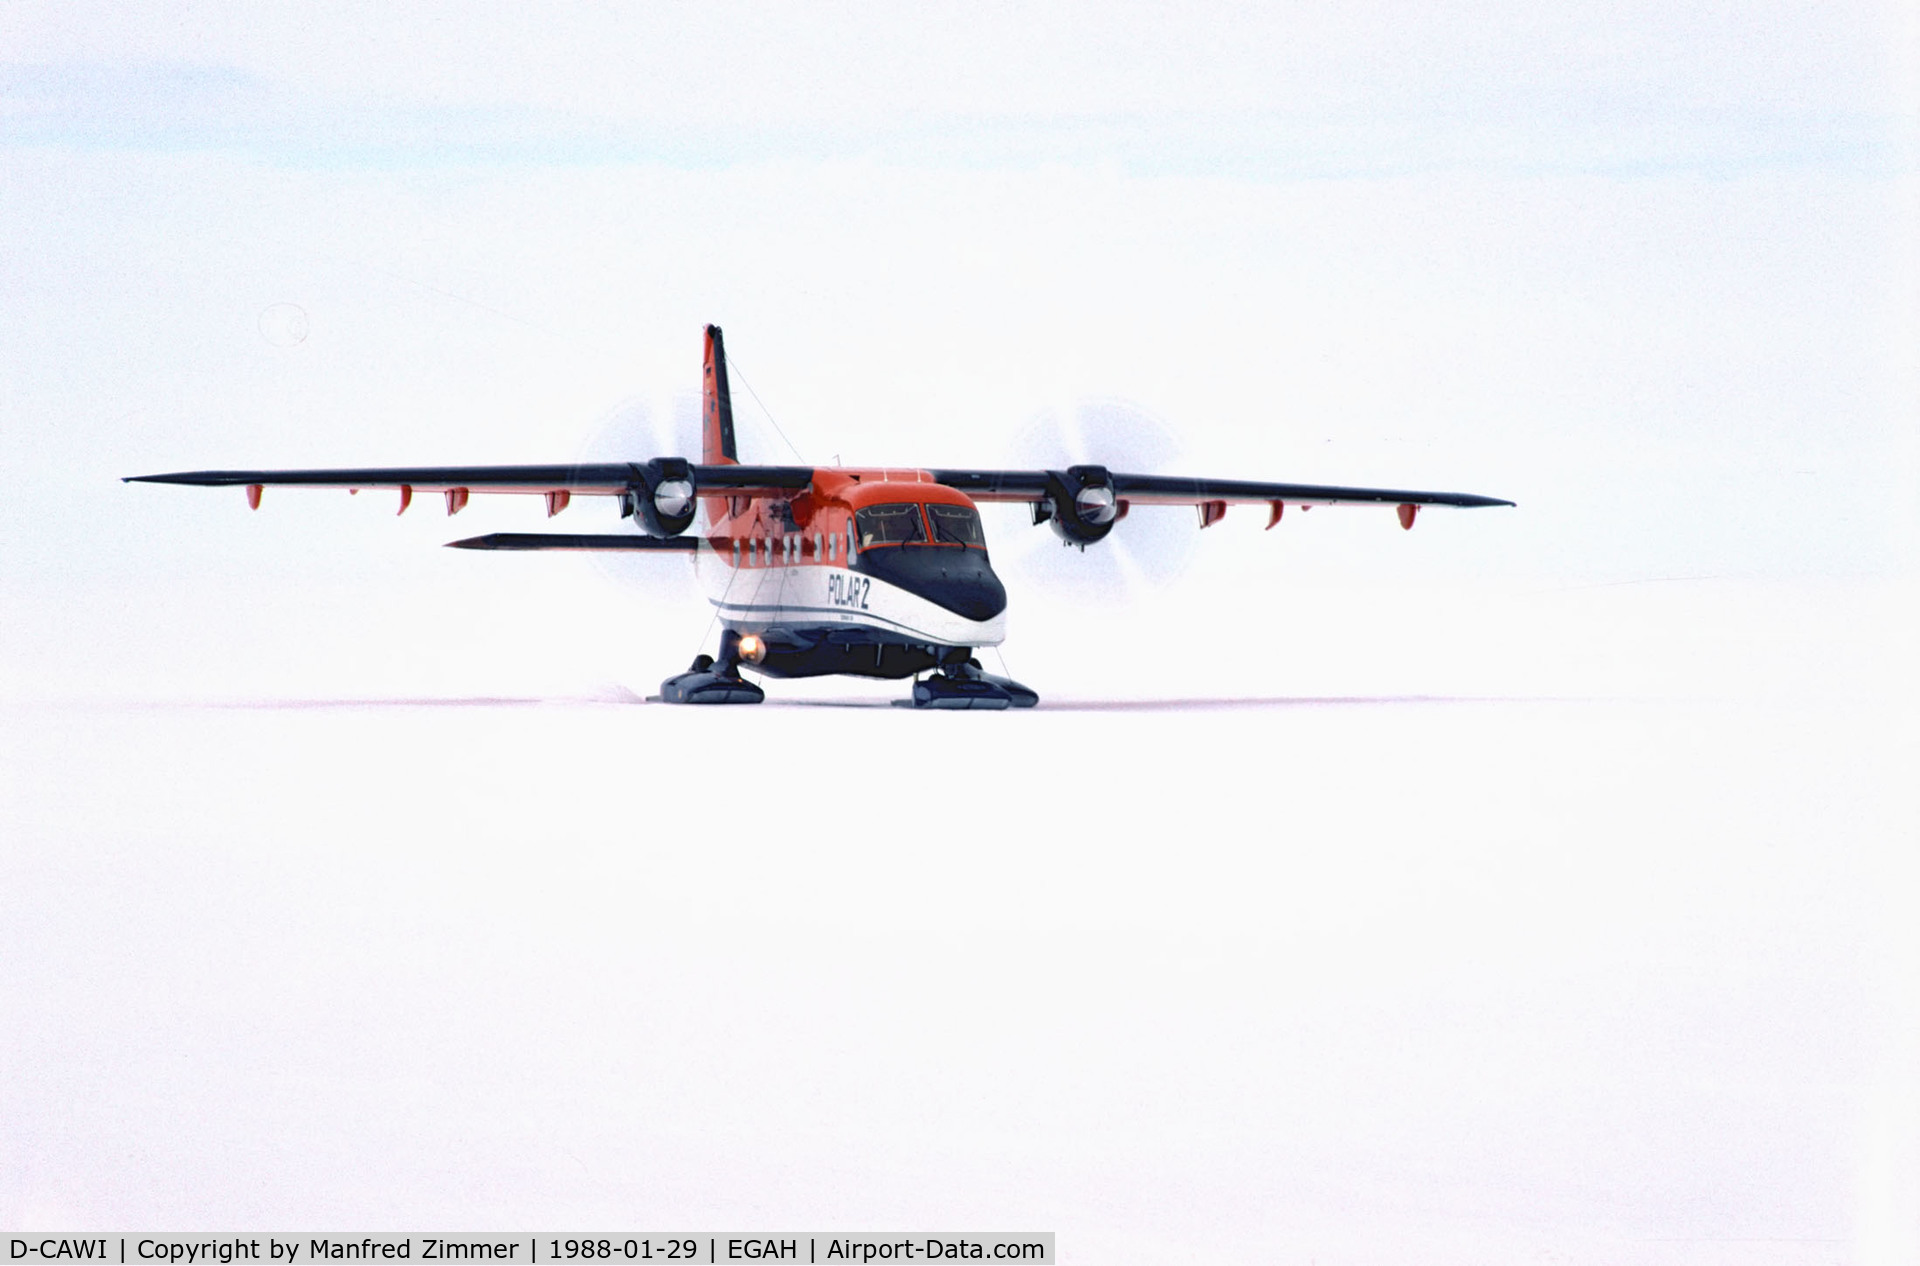 D-CAWI, 1983 Dornier 228-101 C/N 7014, POLAR 2 D-CAWI after landing during white-out conditions at Halley Station, Brunt Ice Shelf, Antarctica